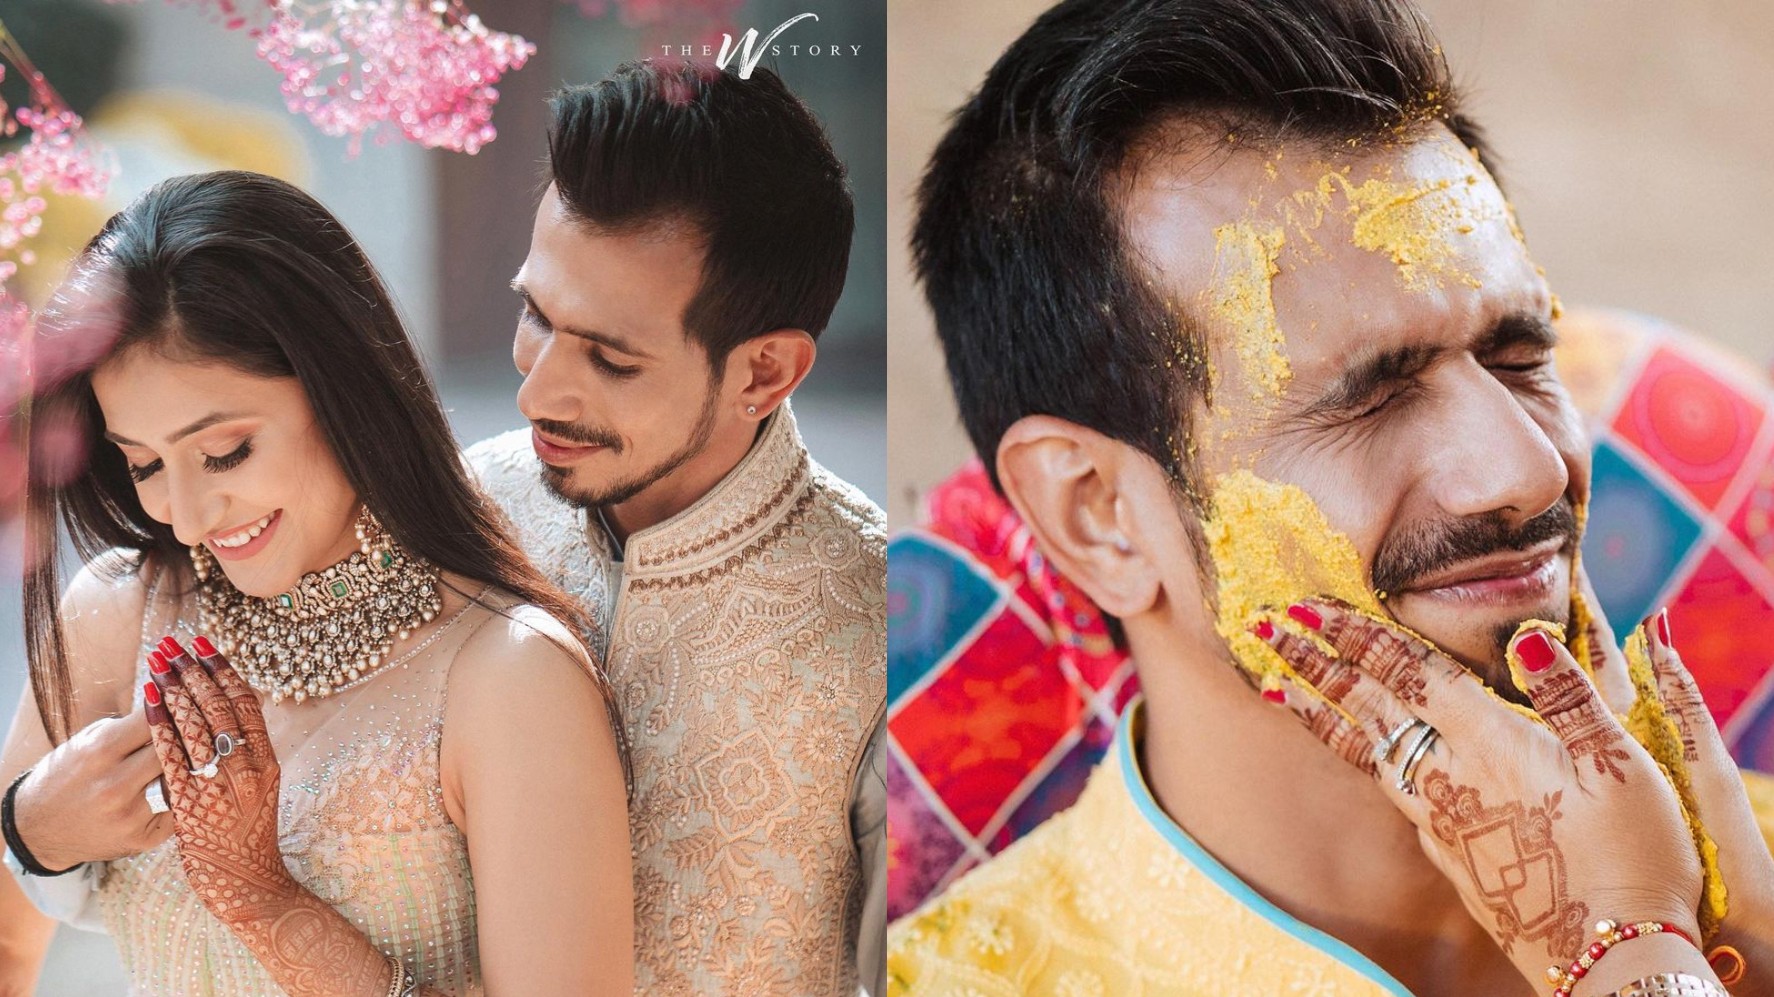 Yuzvendra Chahal shares pictures from his engagement, haldi ceremony with Dhanashree Verma